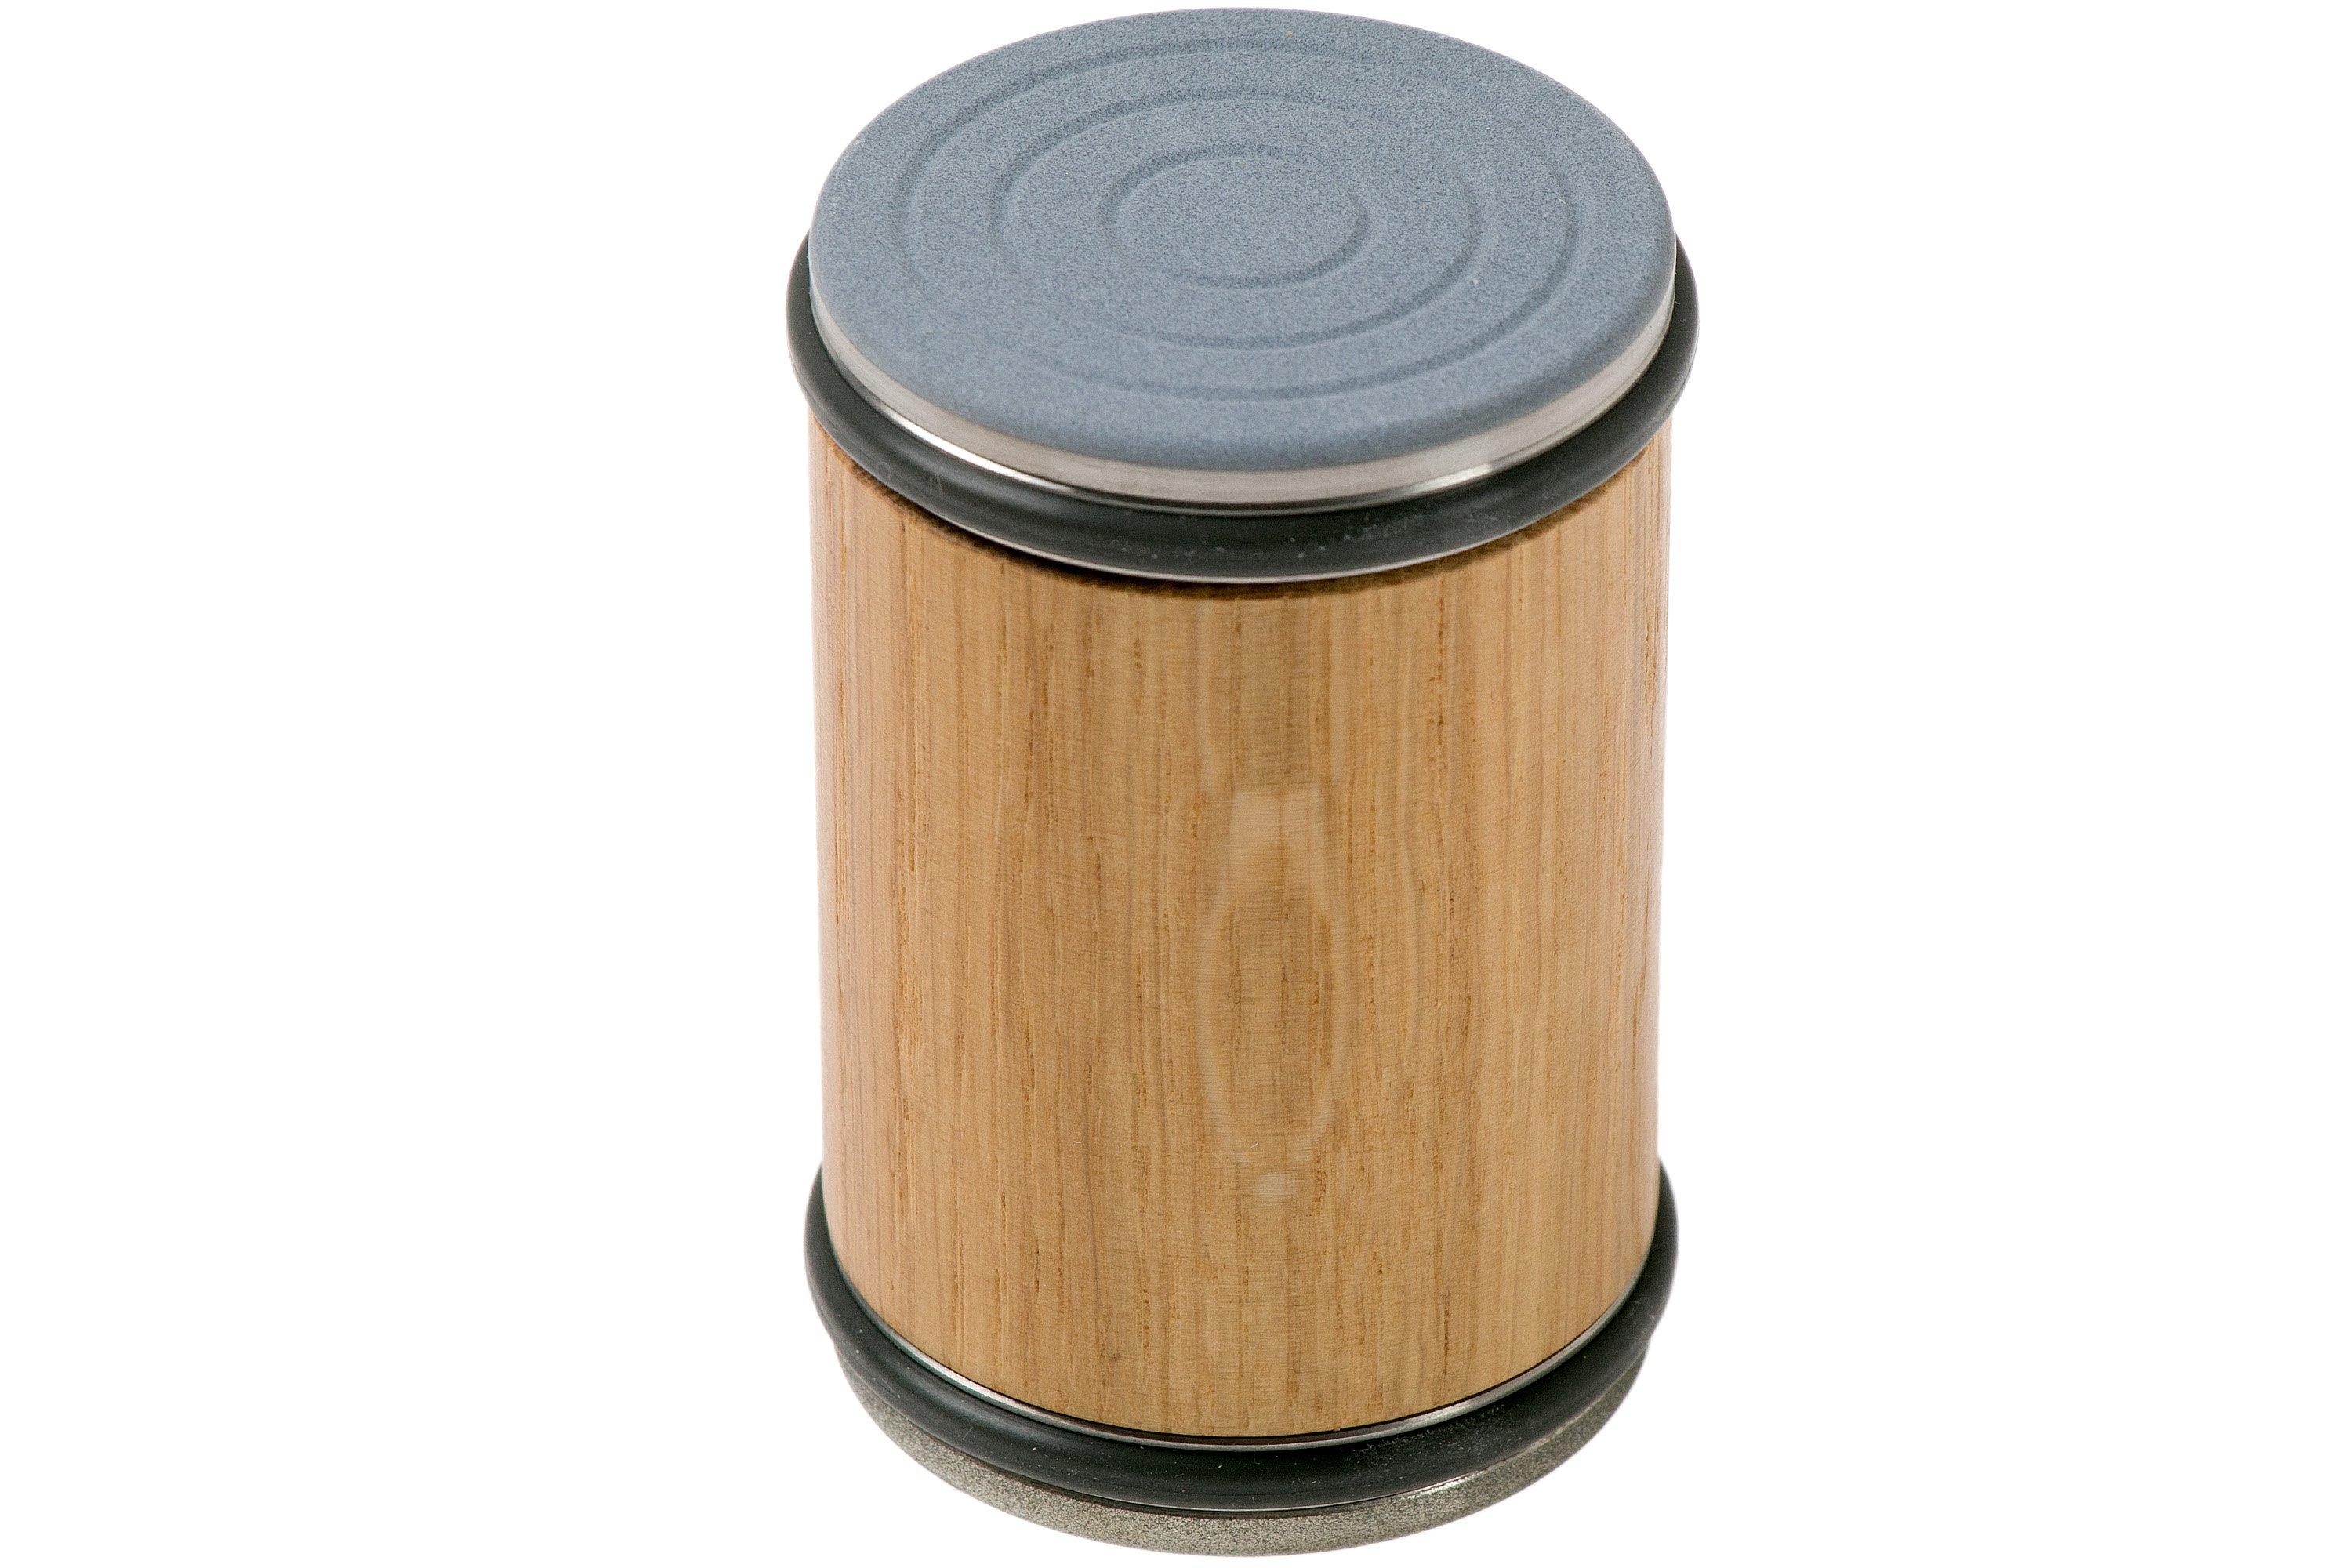 Horl - 2 OAK - sharpener with diamond and ceramic disc - Made in Germany